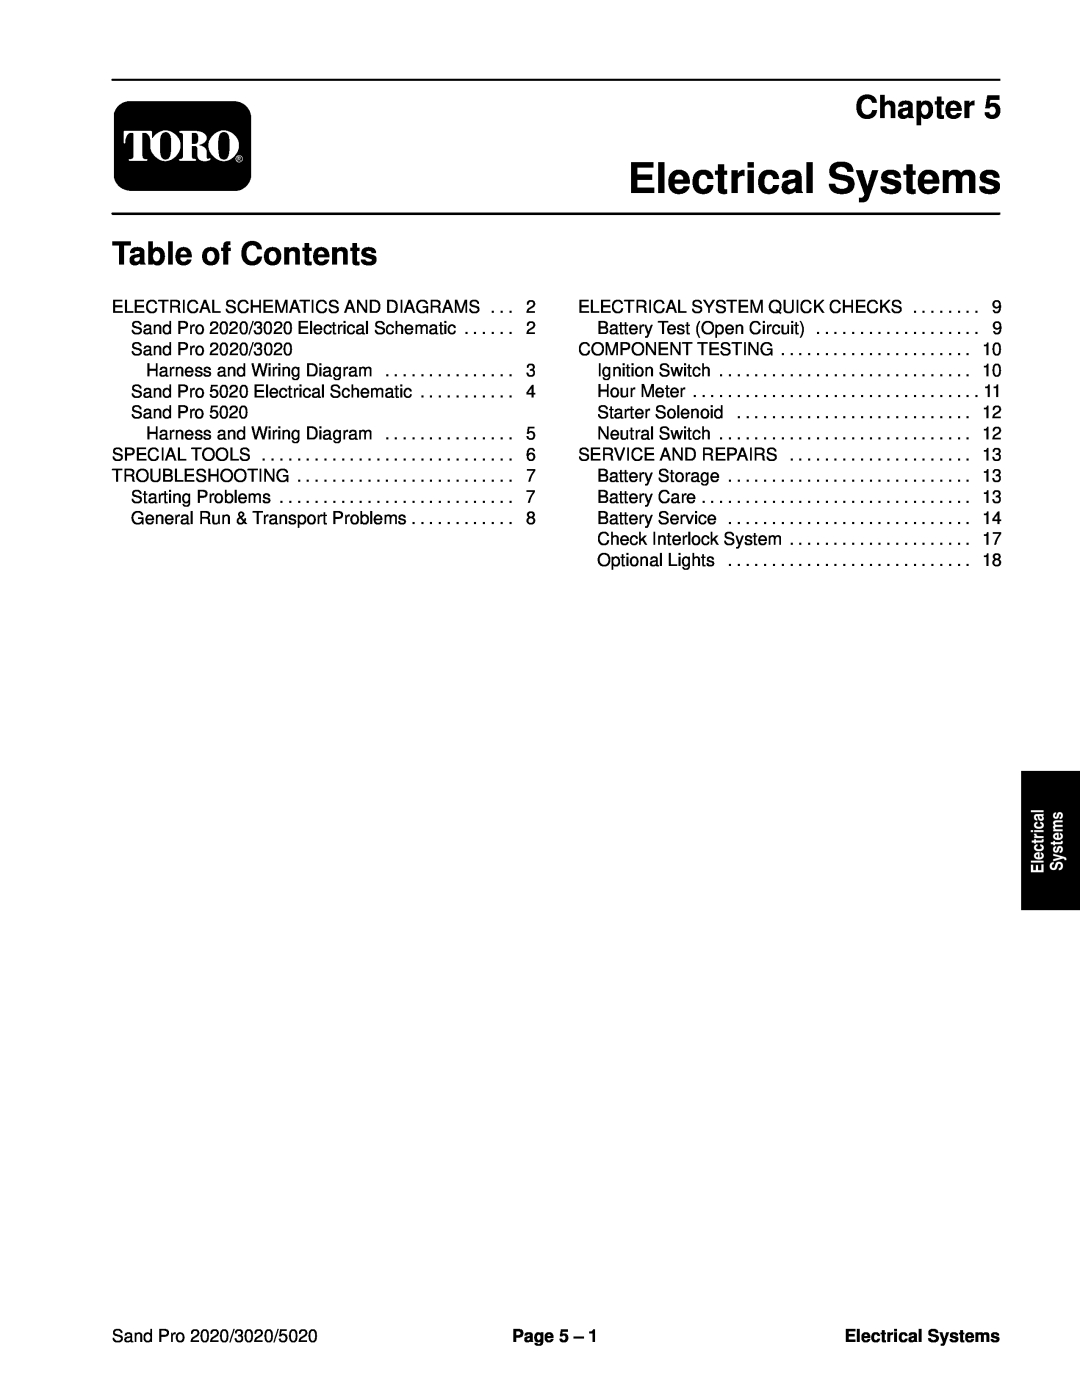 Toro service manual Electrical Systems, Chapter, Table of Contents, Sand Pro 2020/3020/5020, Page 5 